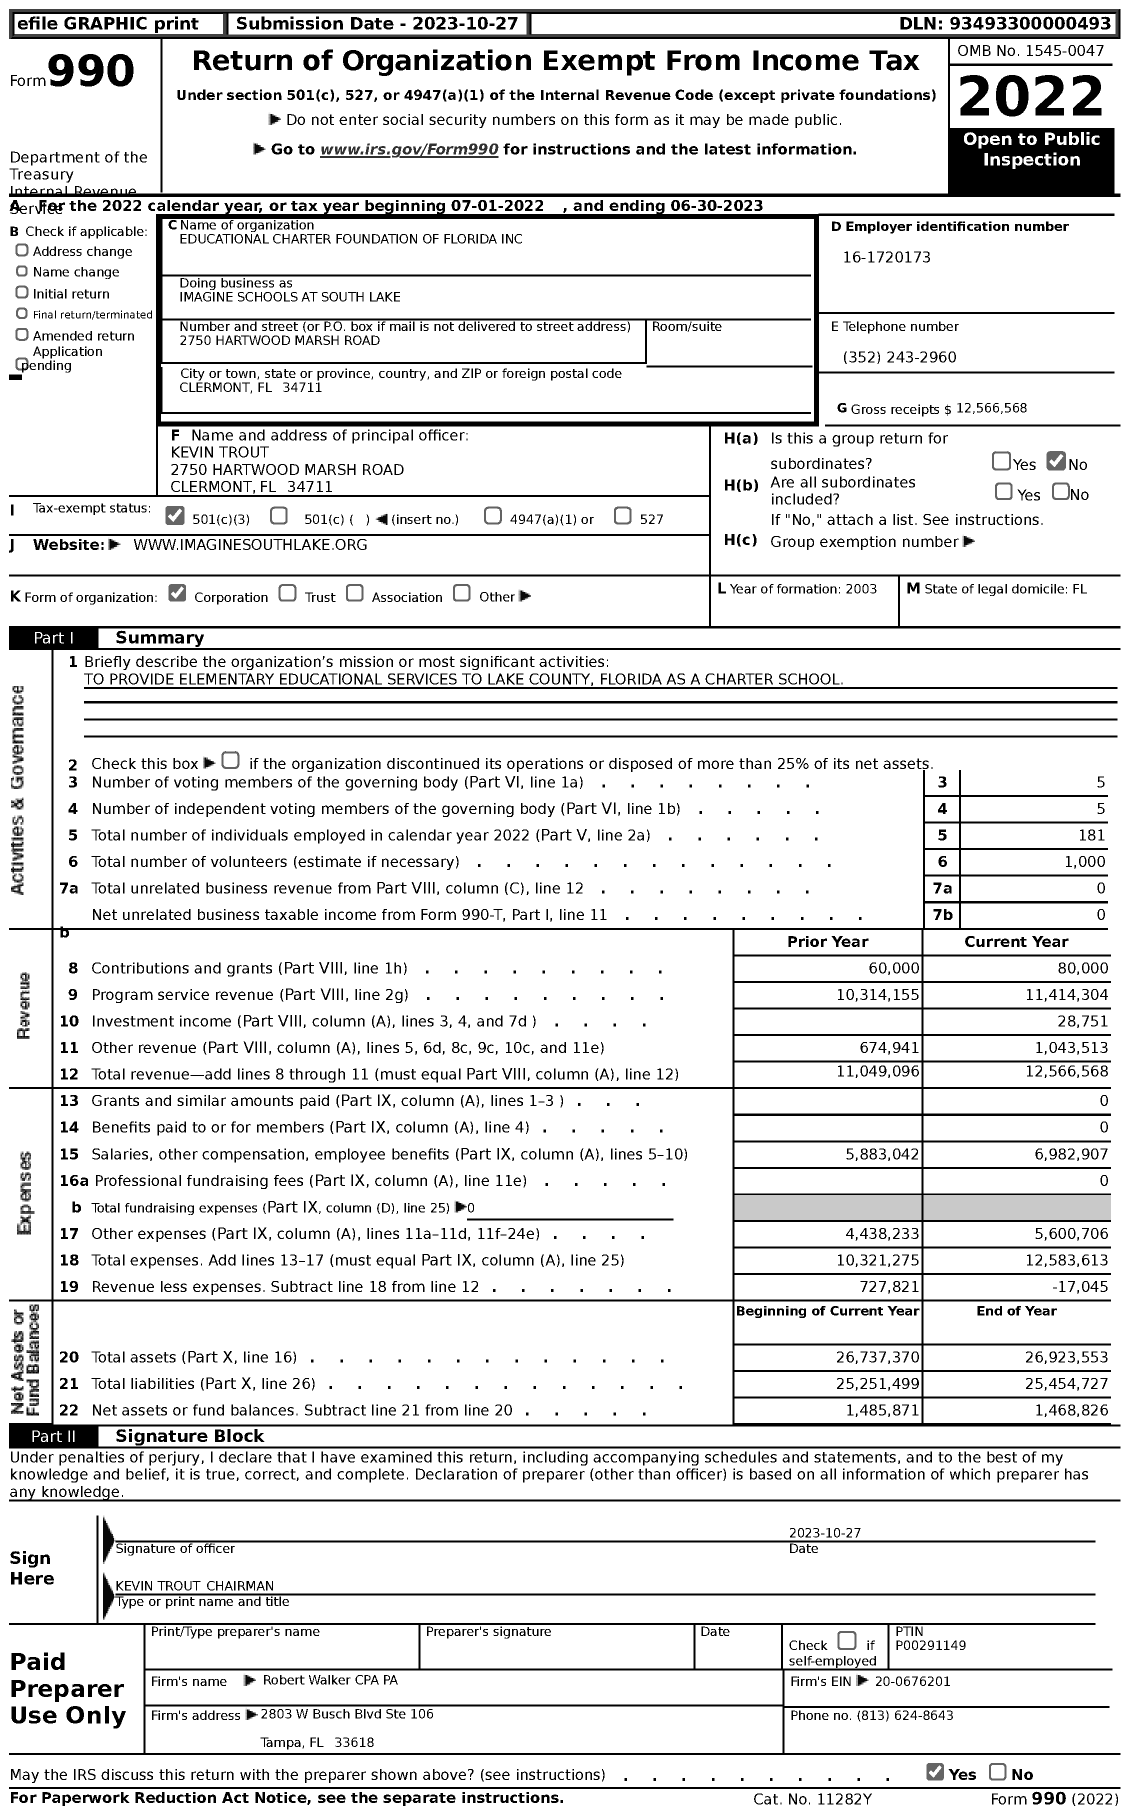 Image of first page of 2022 Form 990 for Imagine Schools at South Lake